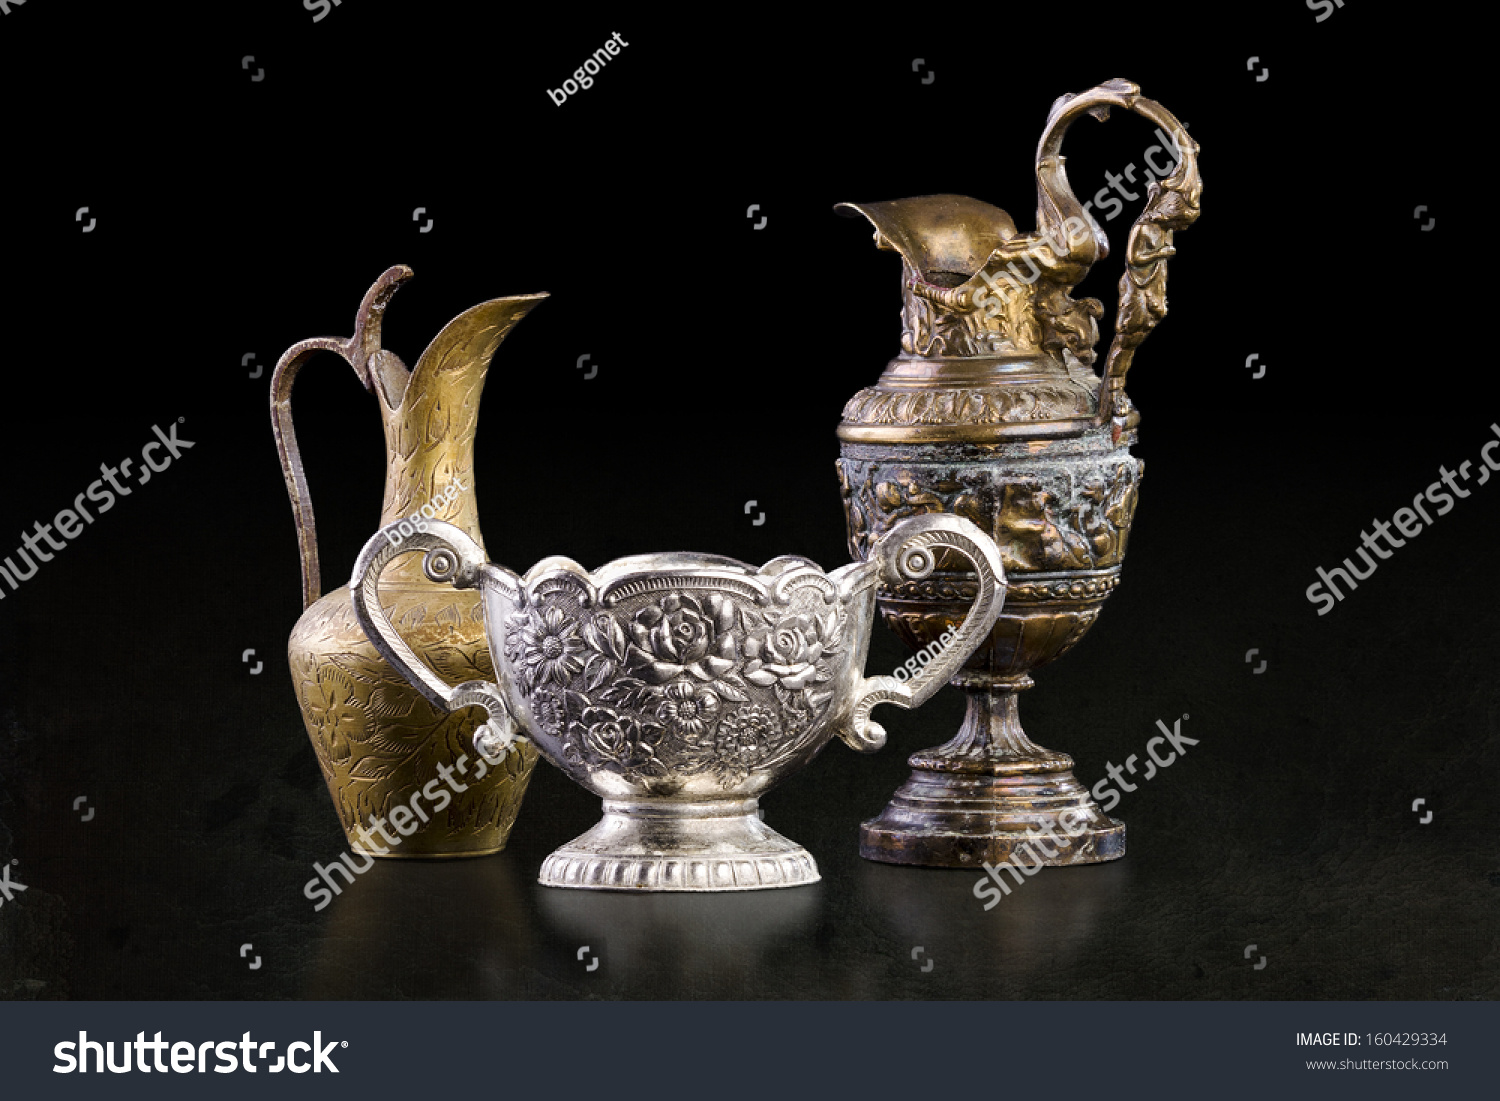 Antique art objects #160429334